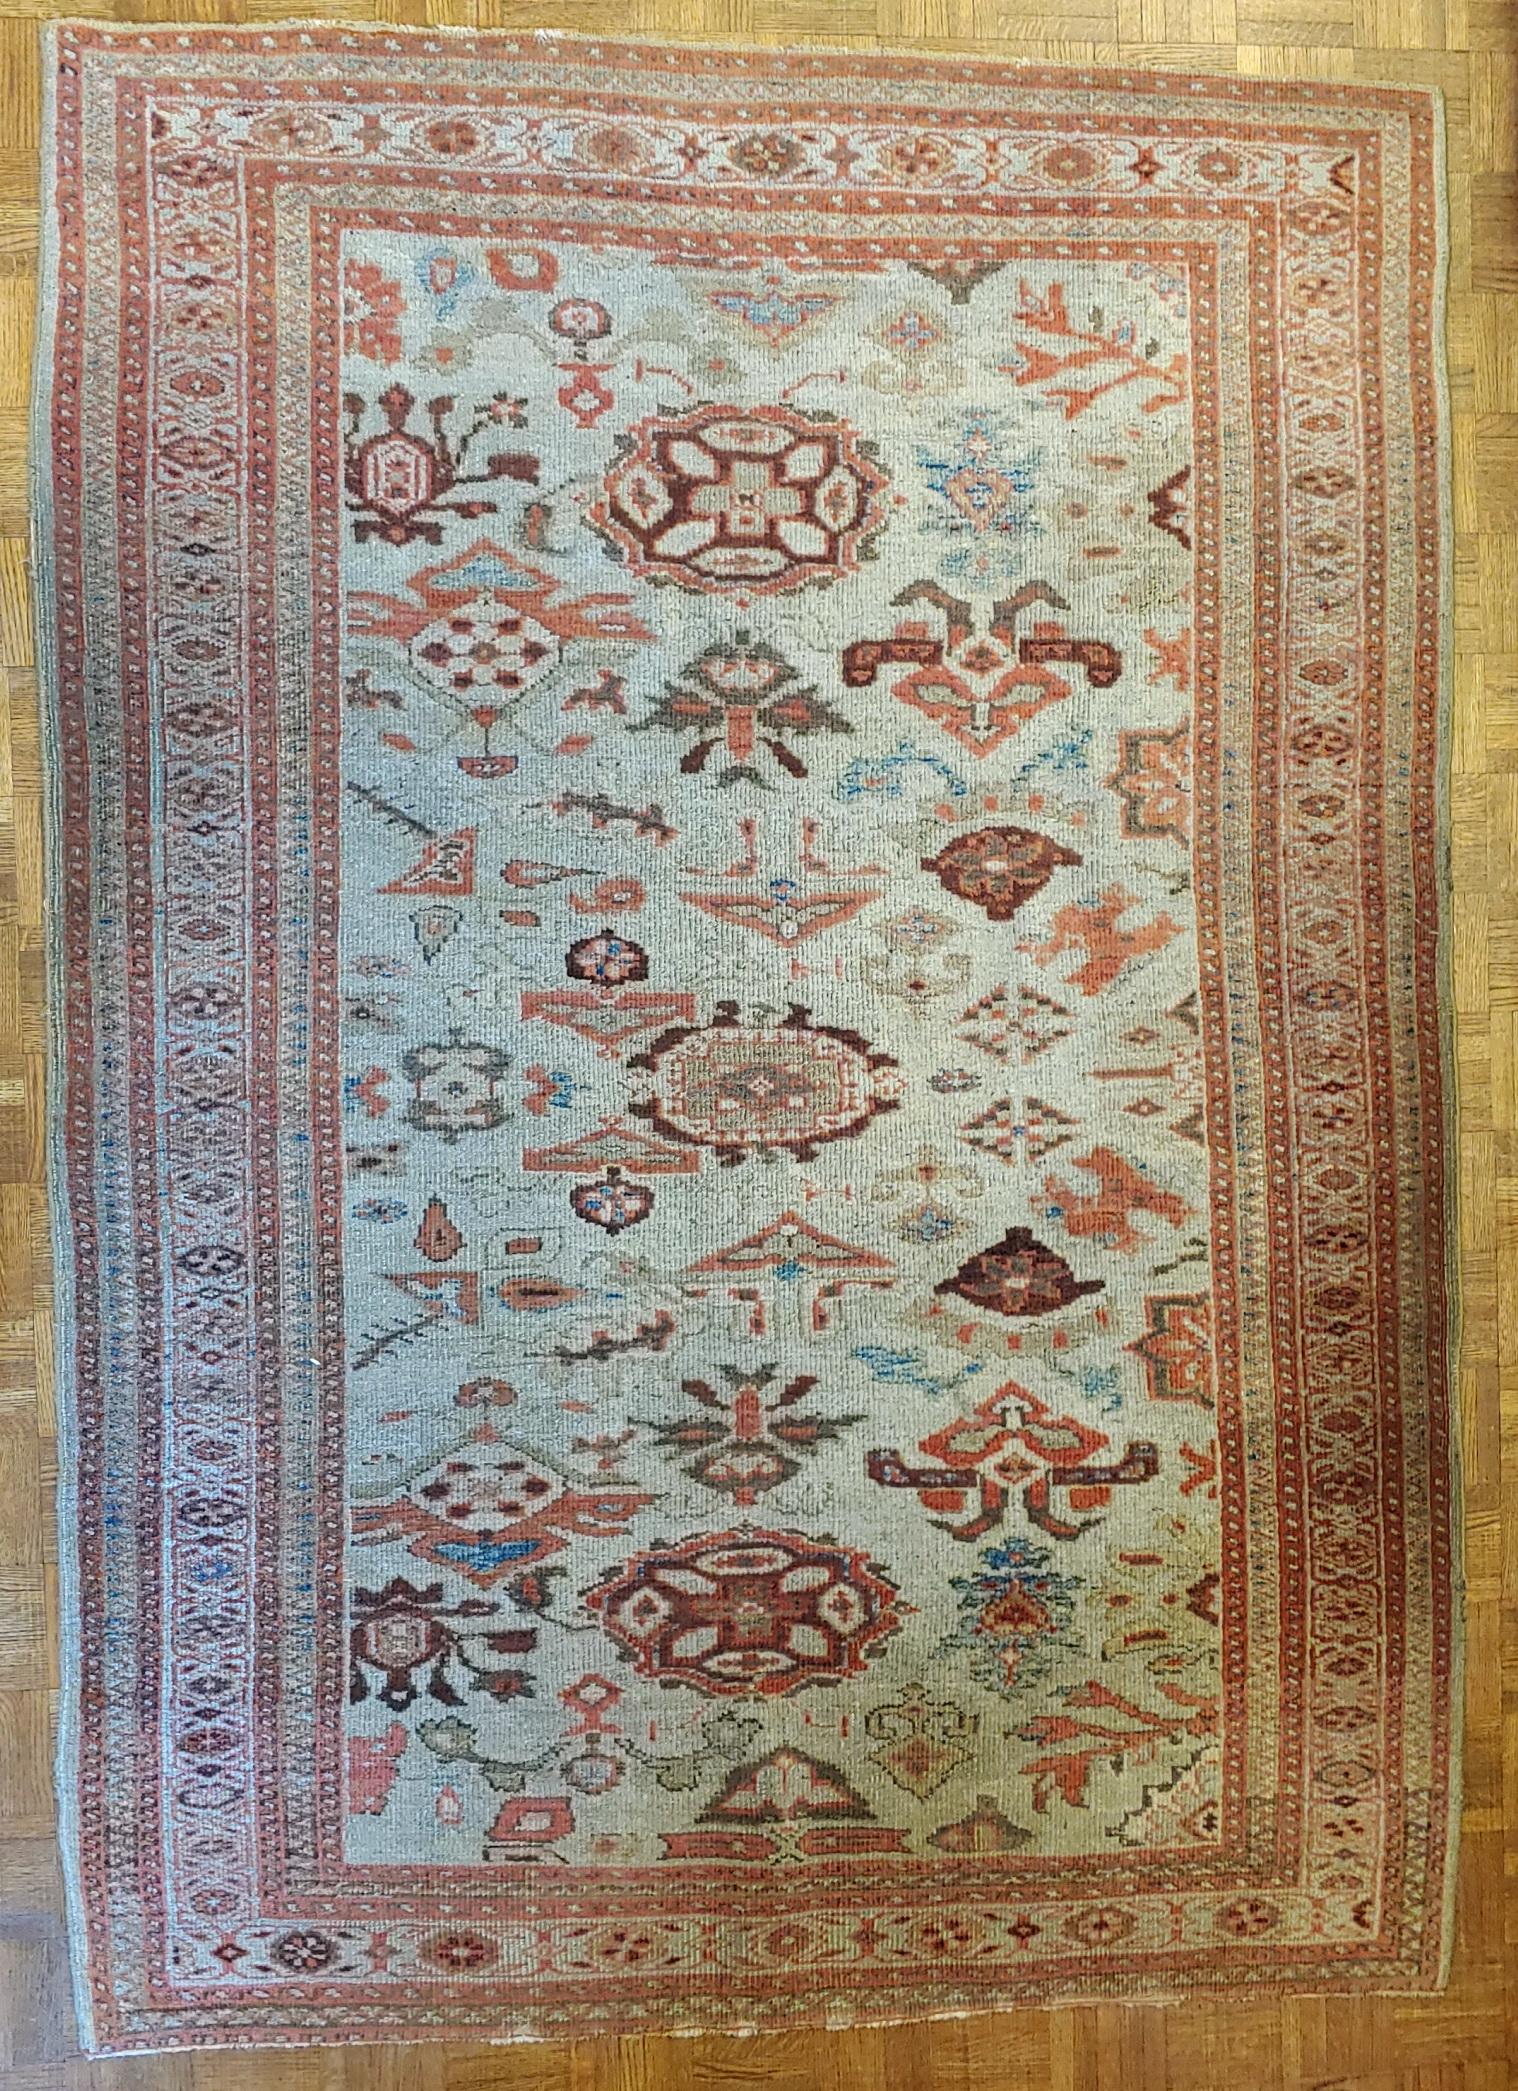 This is a superb example of a late 19th century Persian Mahal rug, known as a Sultanabad or a Ziegler Mahal. Ziegler was one of the earliest European companies to start designing rugs for the European and American market. They were some of the